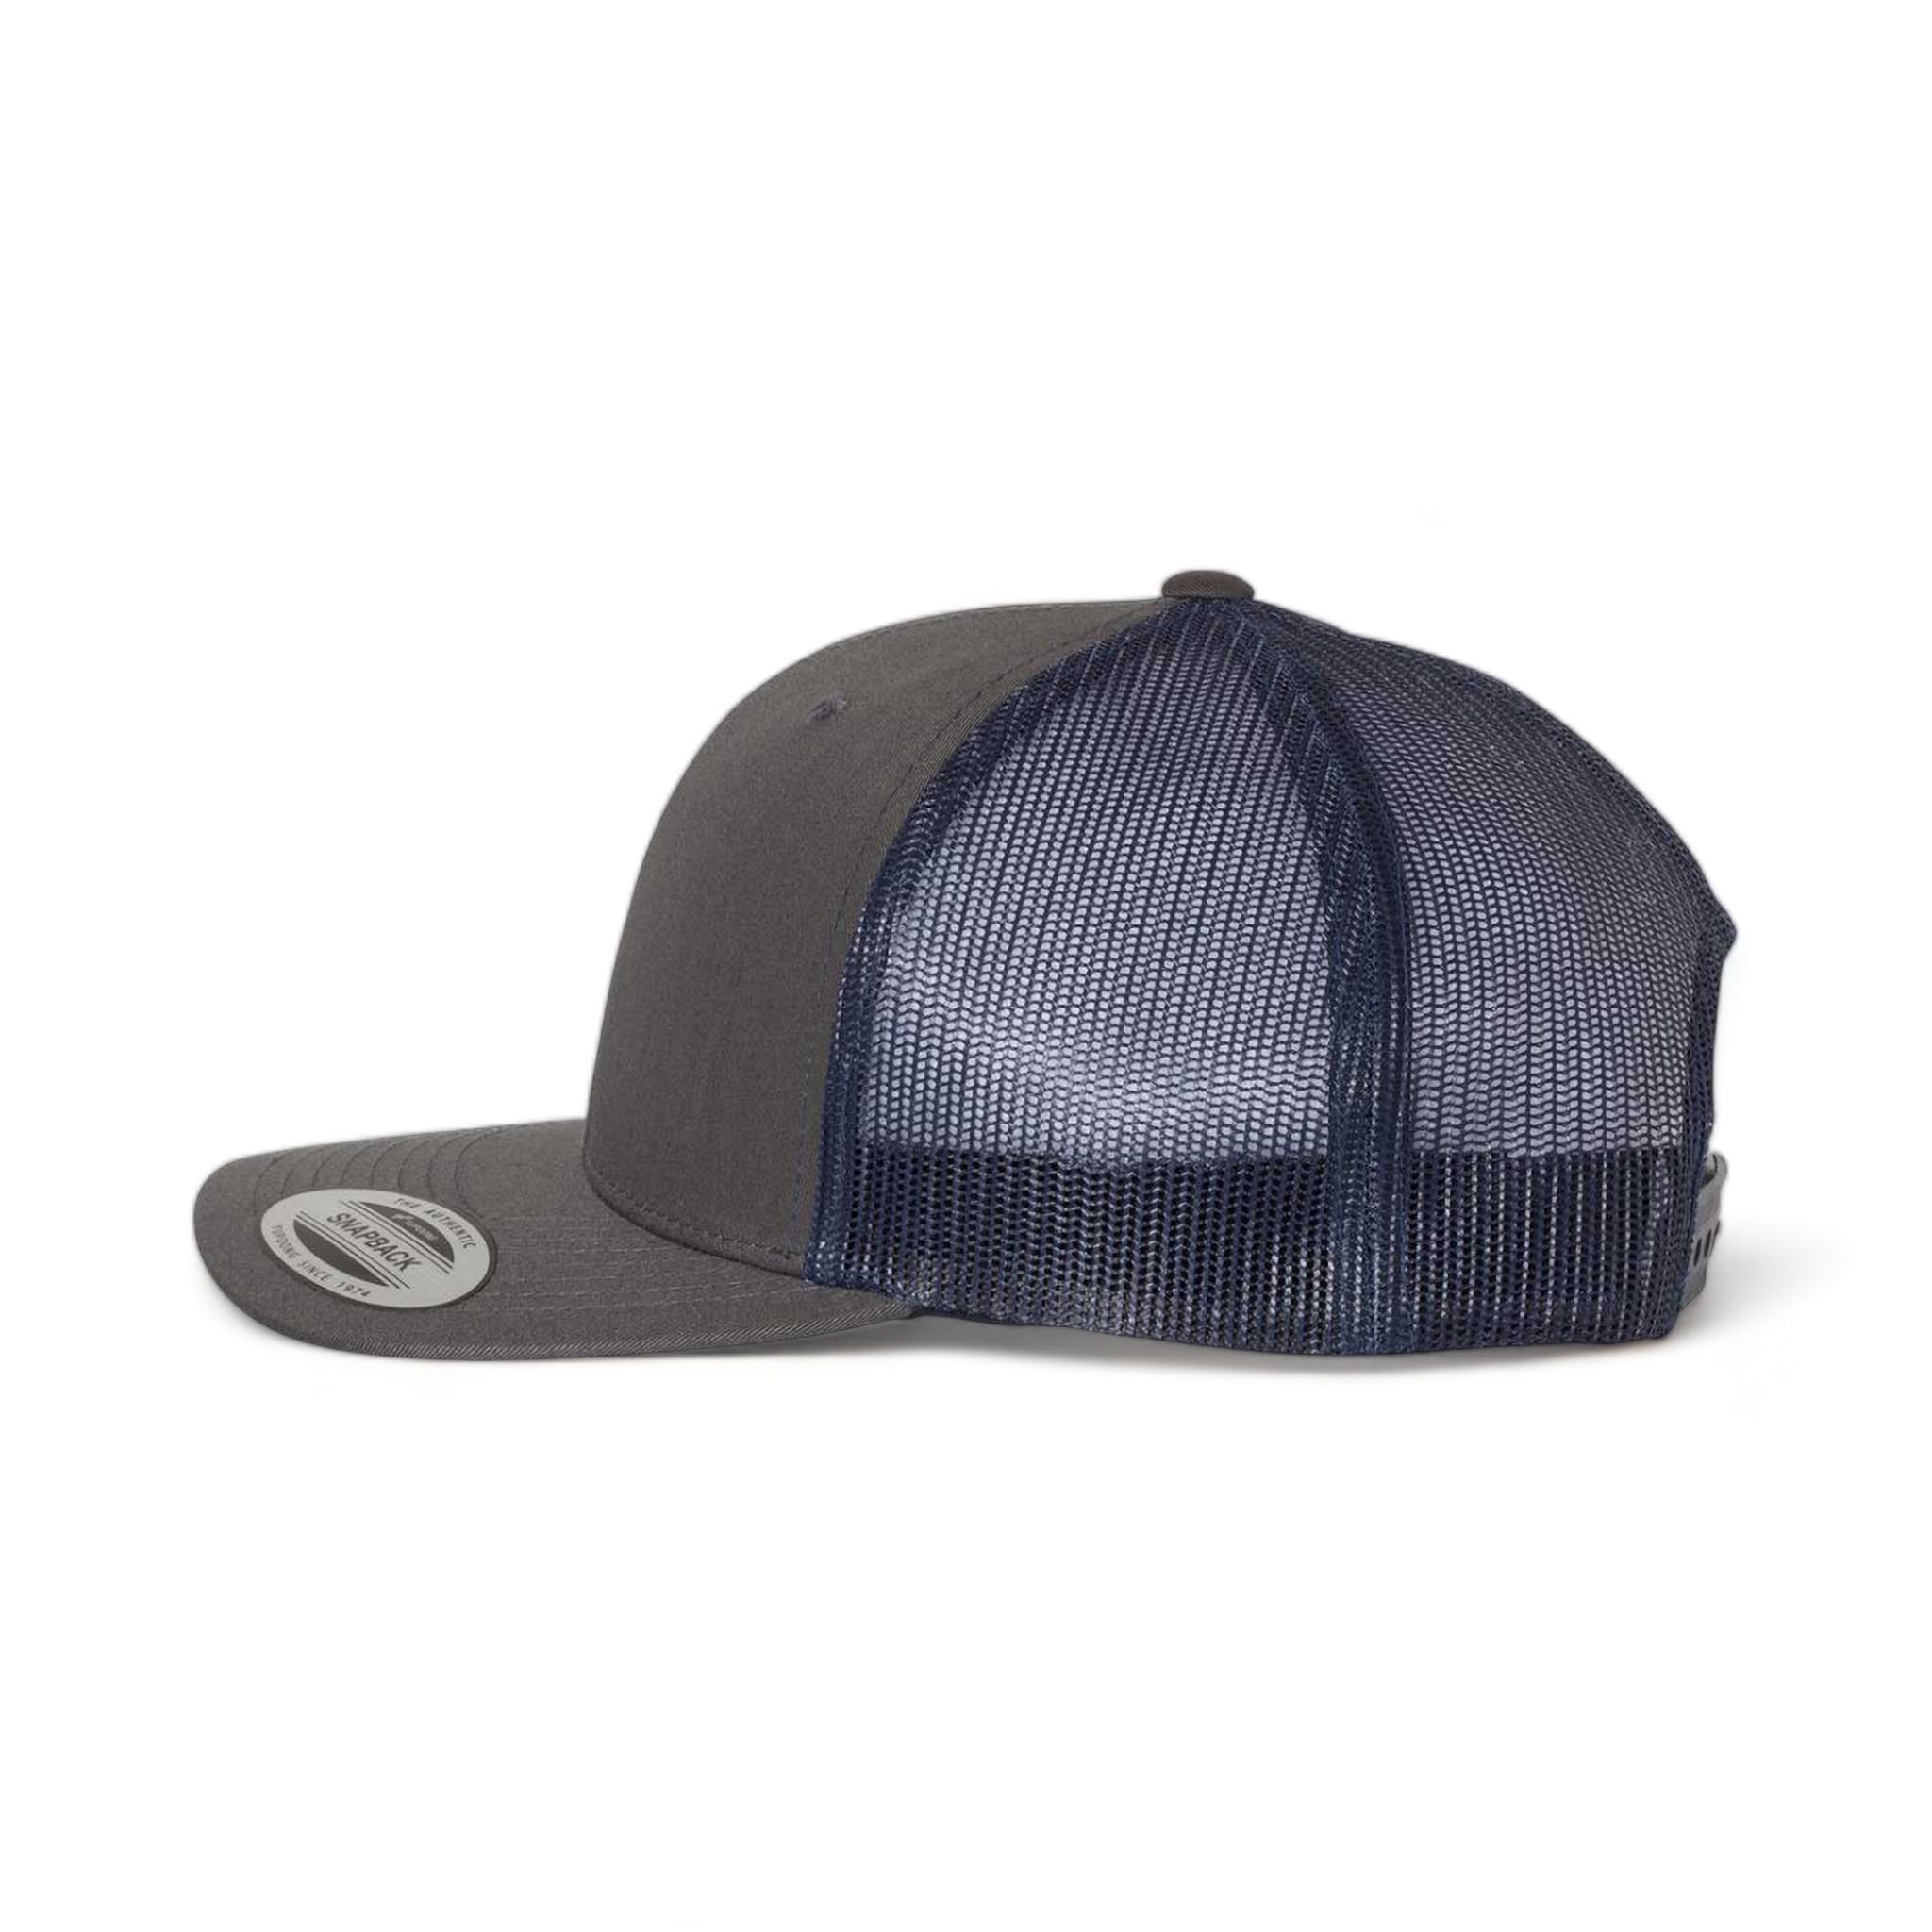 Side view of YP Classics 6606 custom hat in charcoal and navy